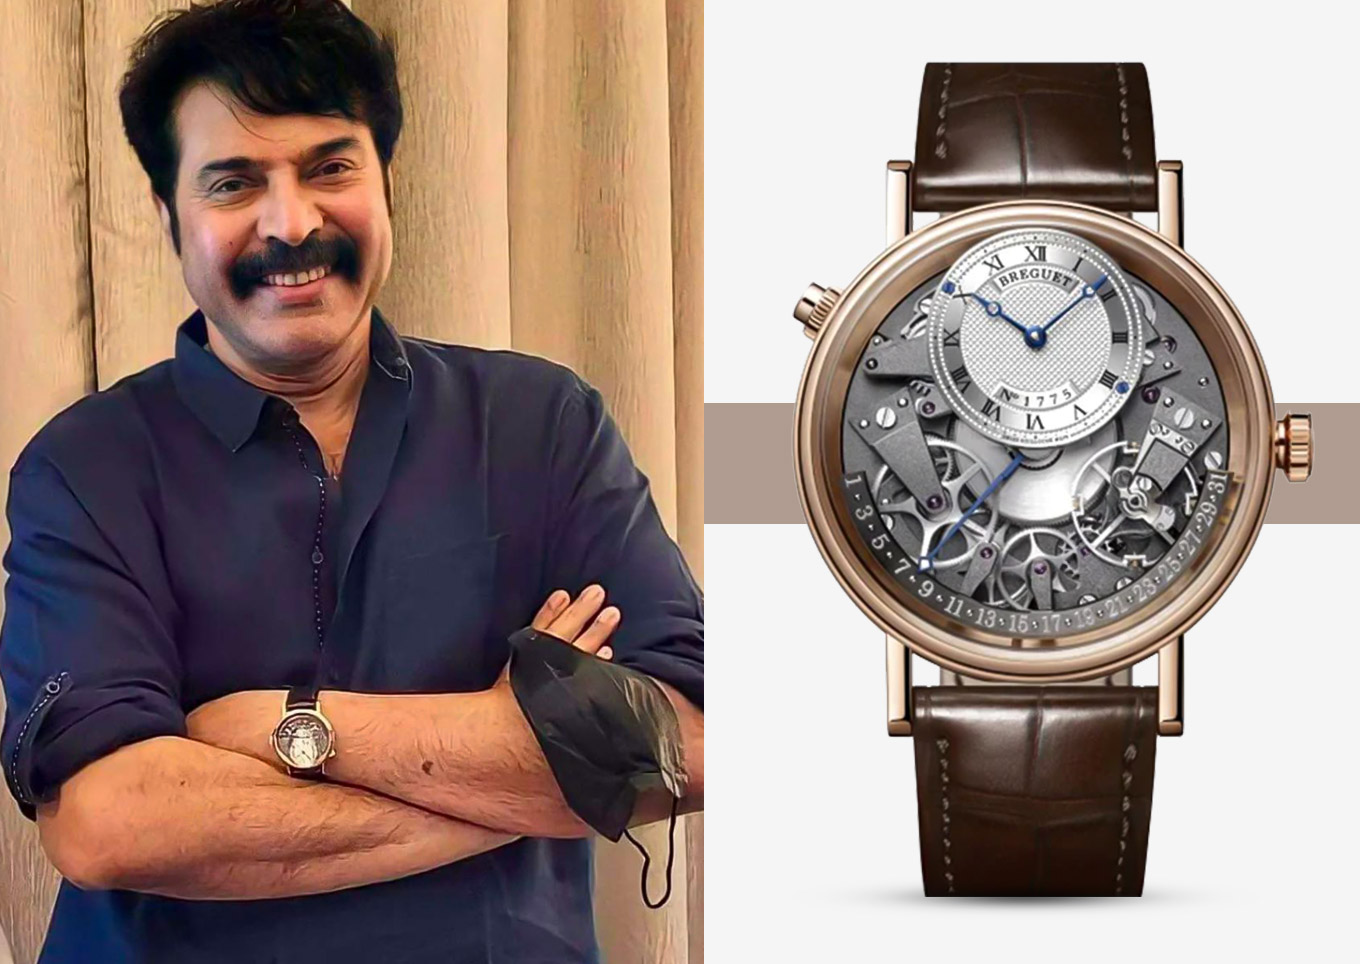 South Indian Actor Mammootty wearing the Breguet Tradition Quantième Rétrograde 7597